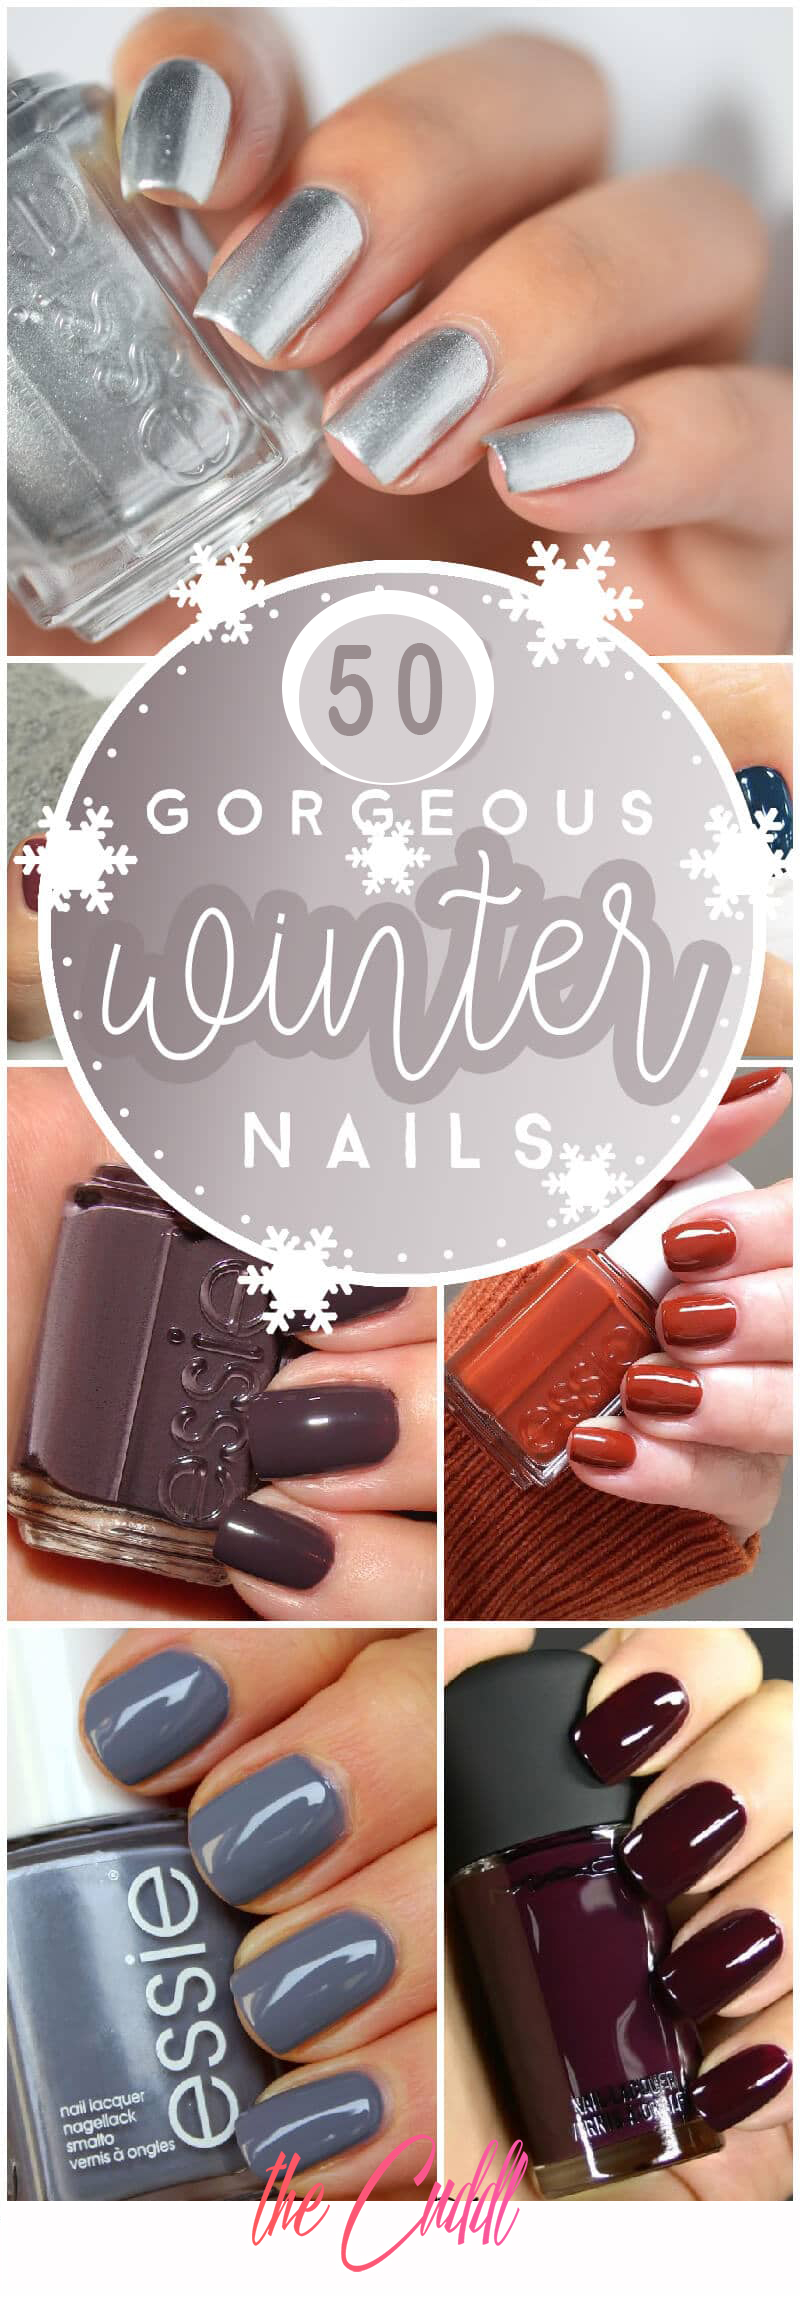 25 Nail Designs To Spice Up Your Winter